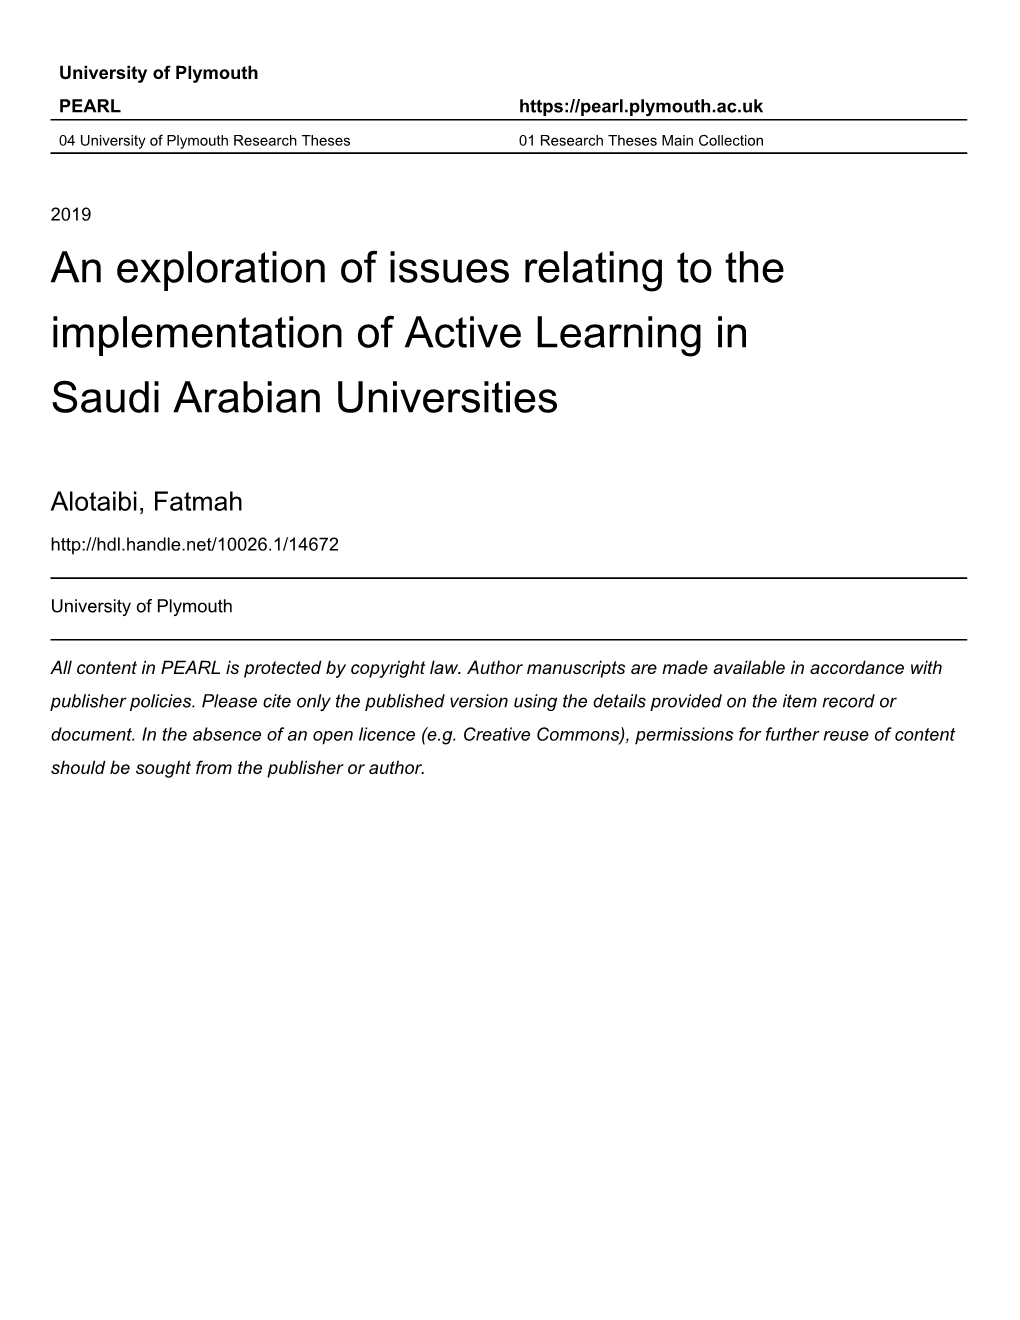 An Exploration of Issues Relating to the Implementation of Active Learning in Saudi Arabian Universities